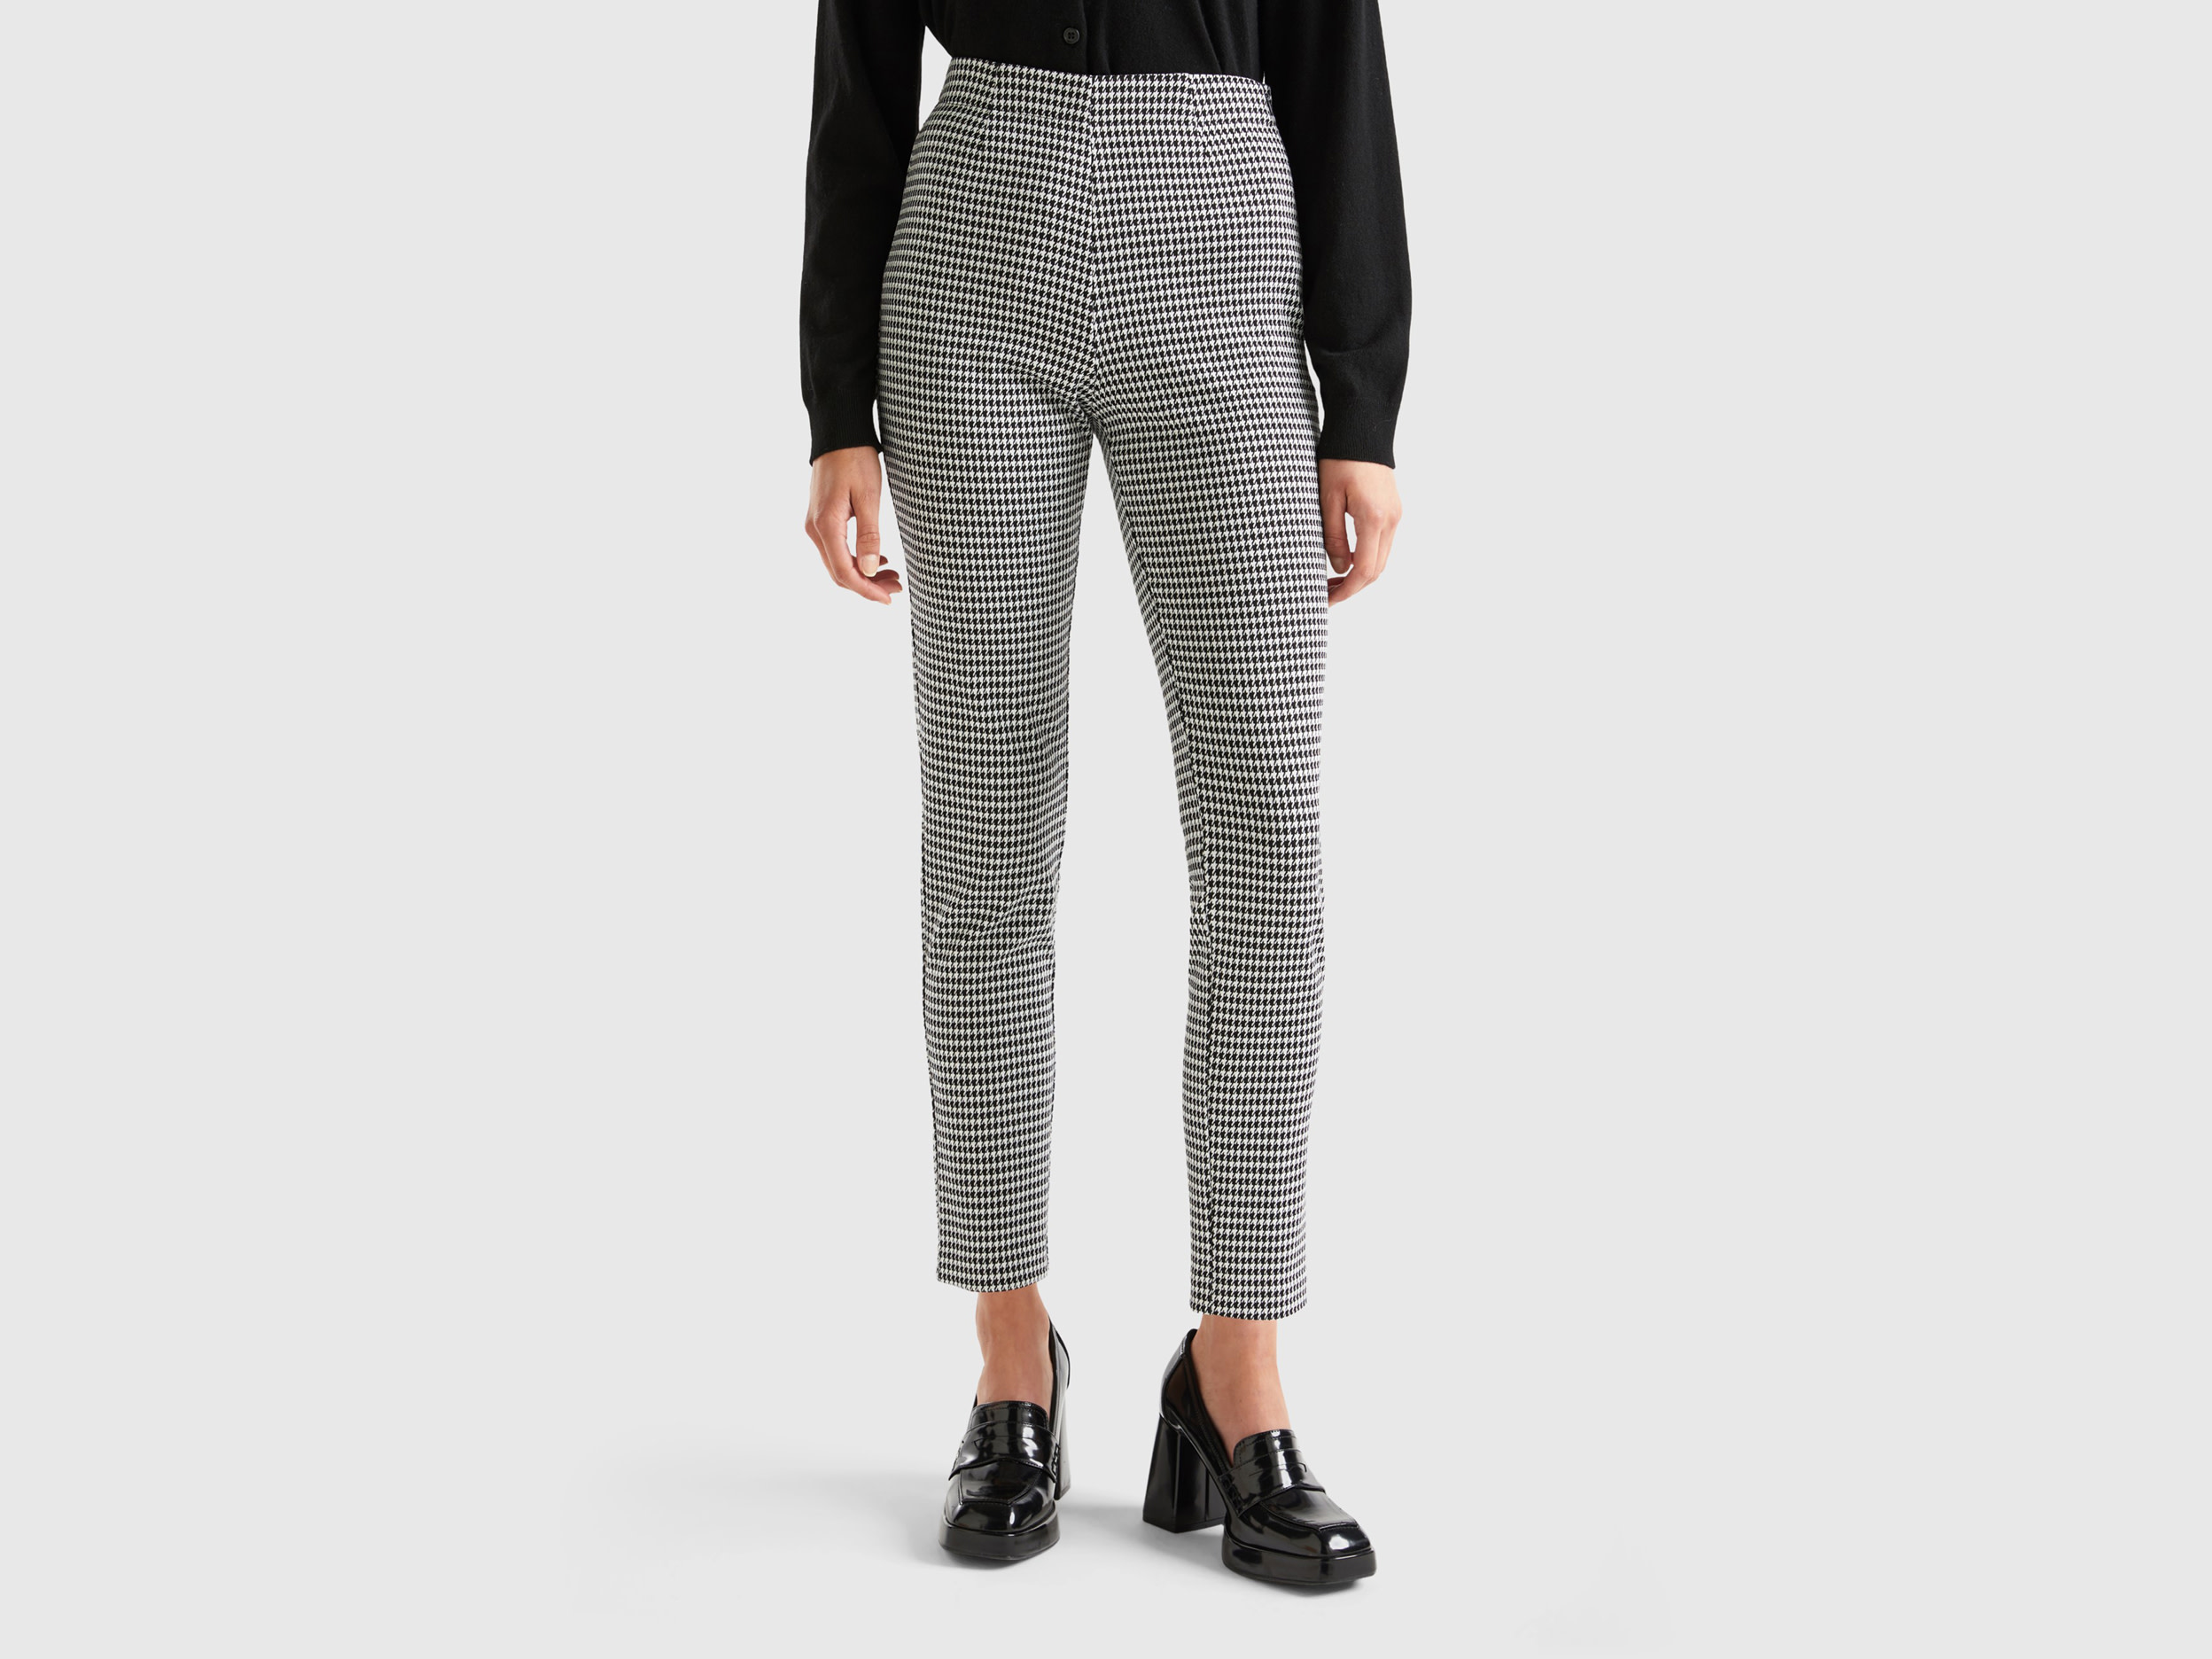 Benetton, Slim Houndstooth Trousers, size S, Multi-color, Women